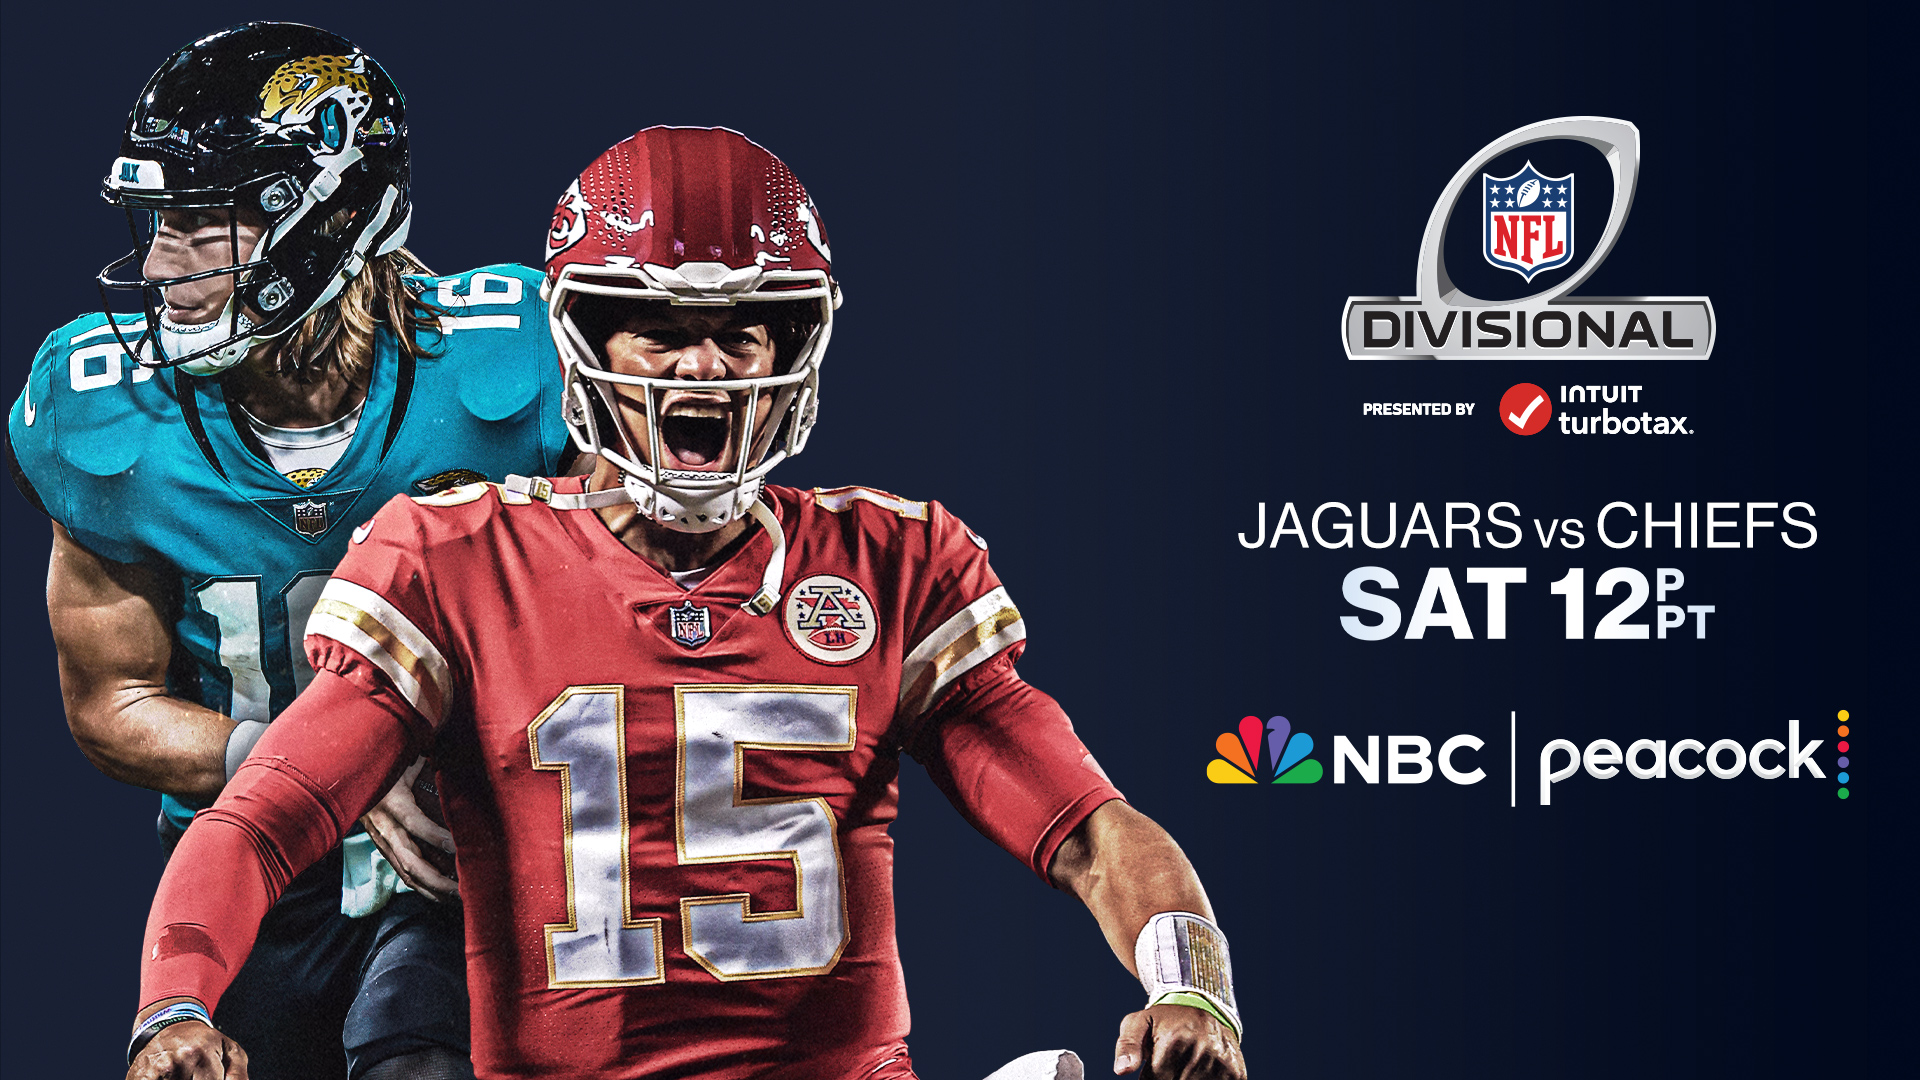 peacock live sports nfl